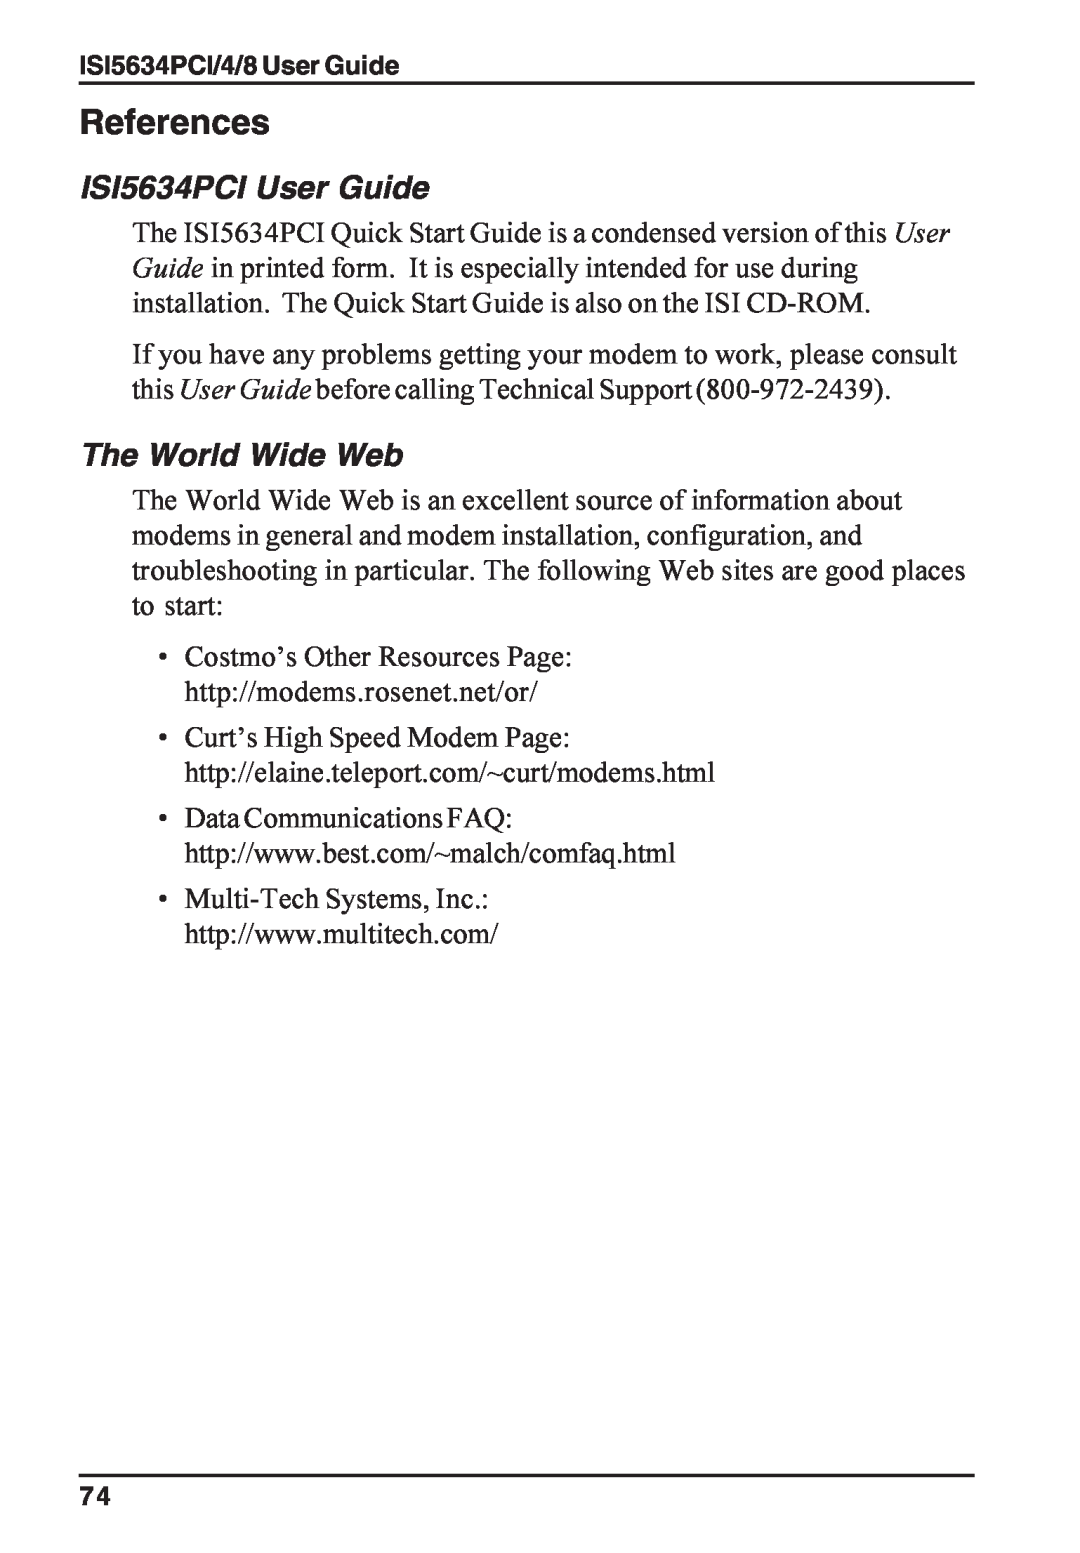 Multi-Tech Systems ISI5634PCI/4/8 manual References, ISI5634PCI User Guide, The World Wide Web 